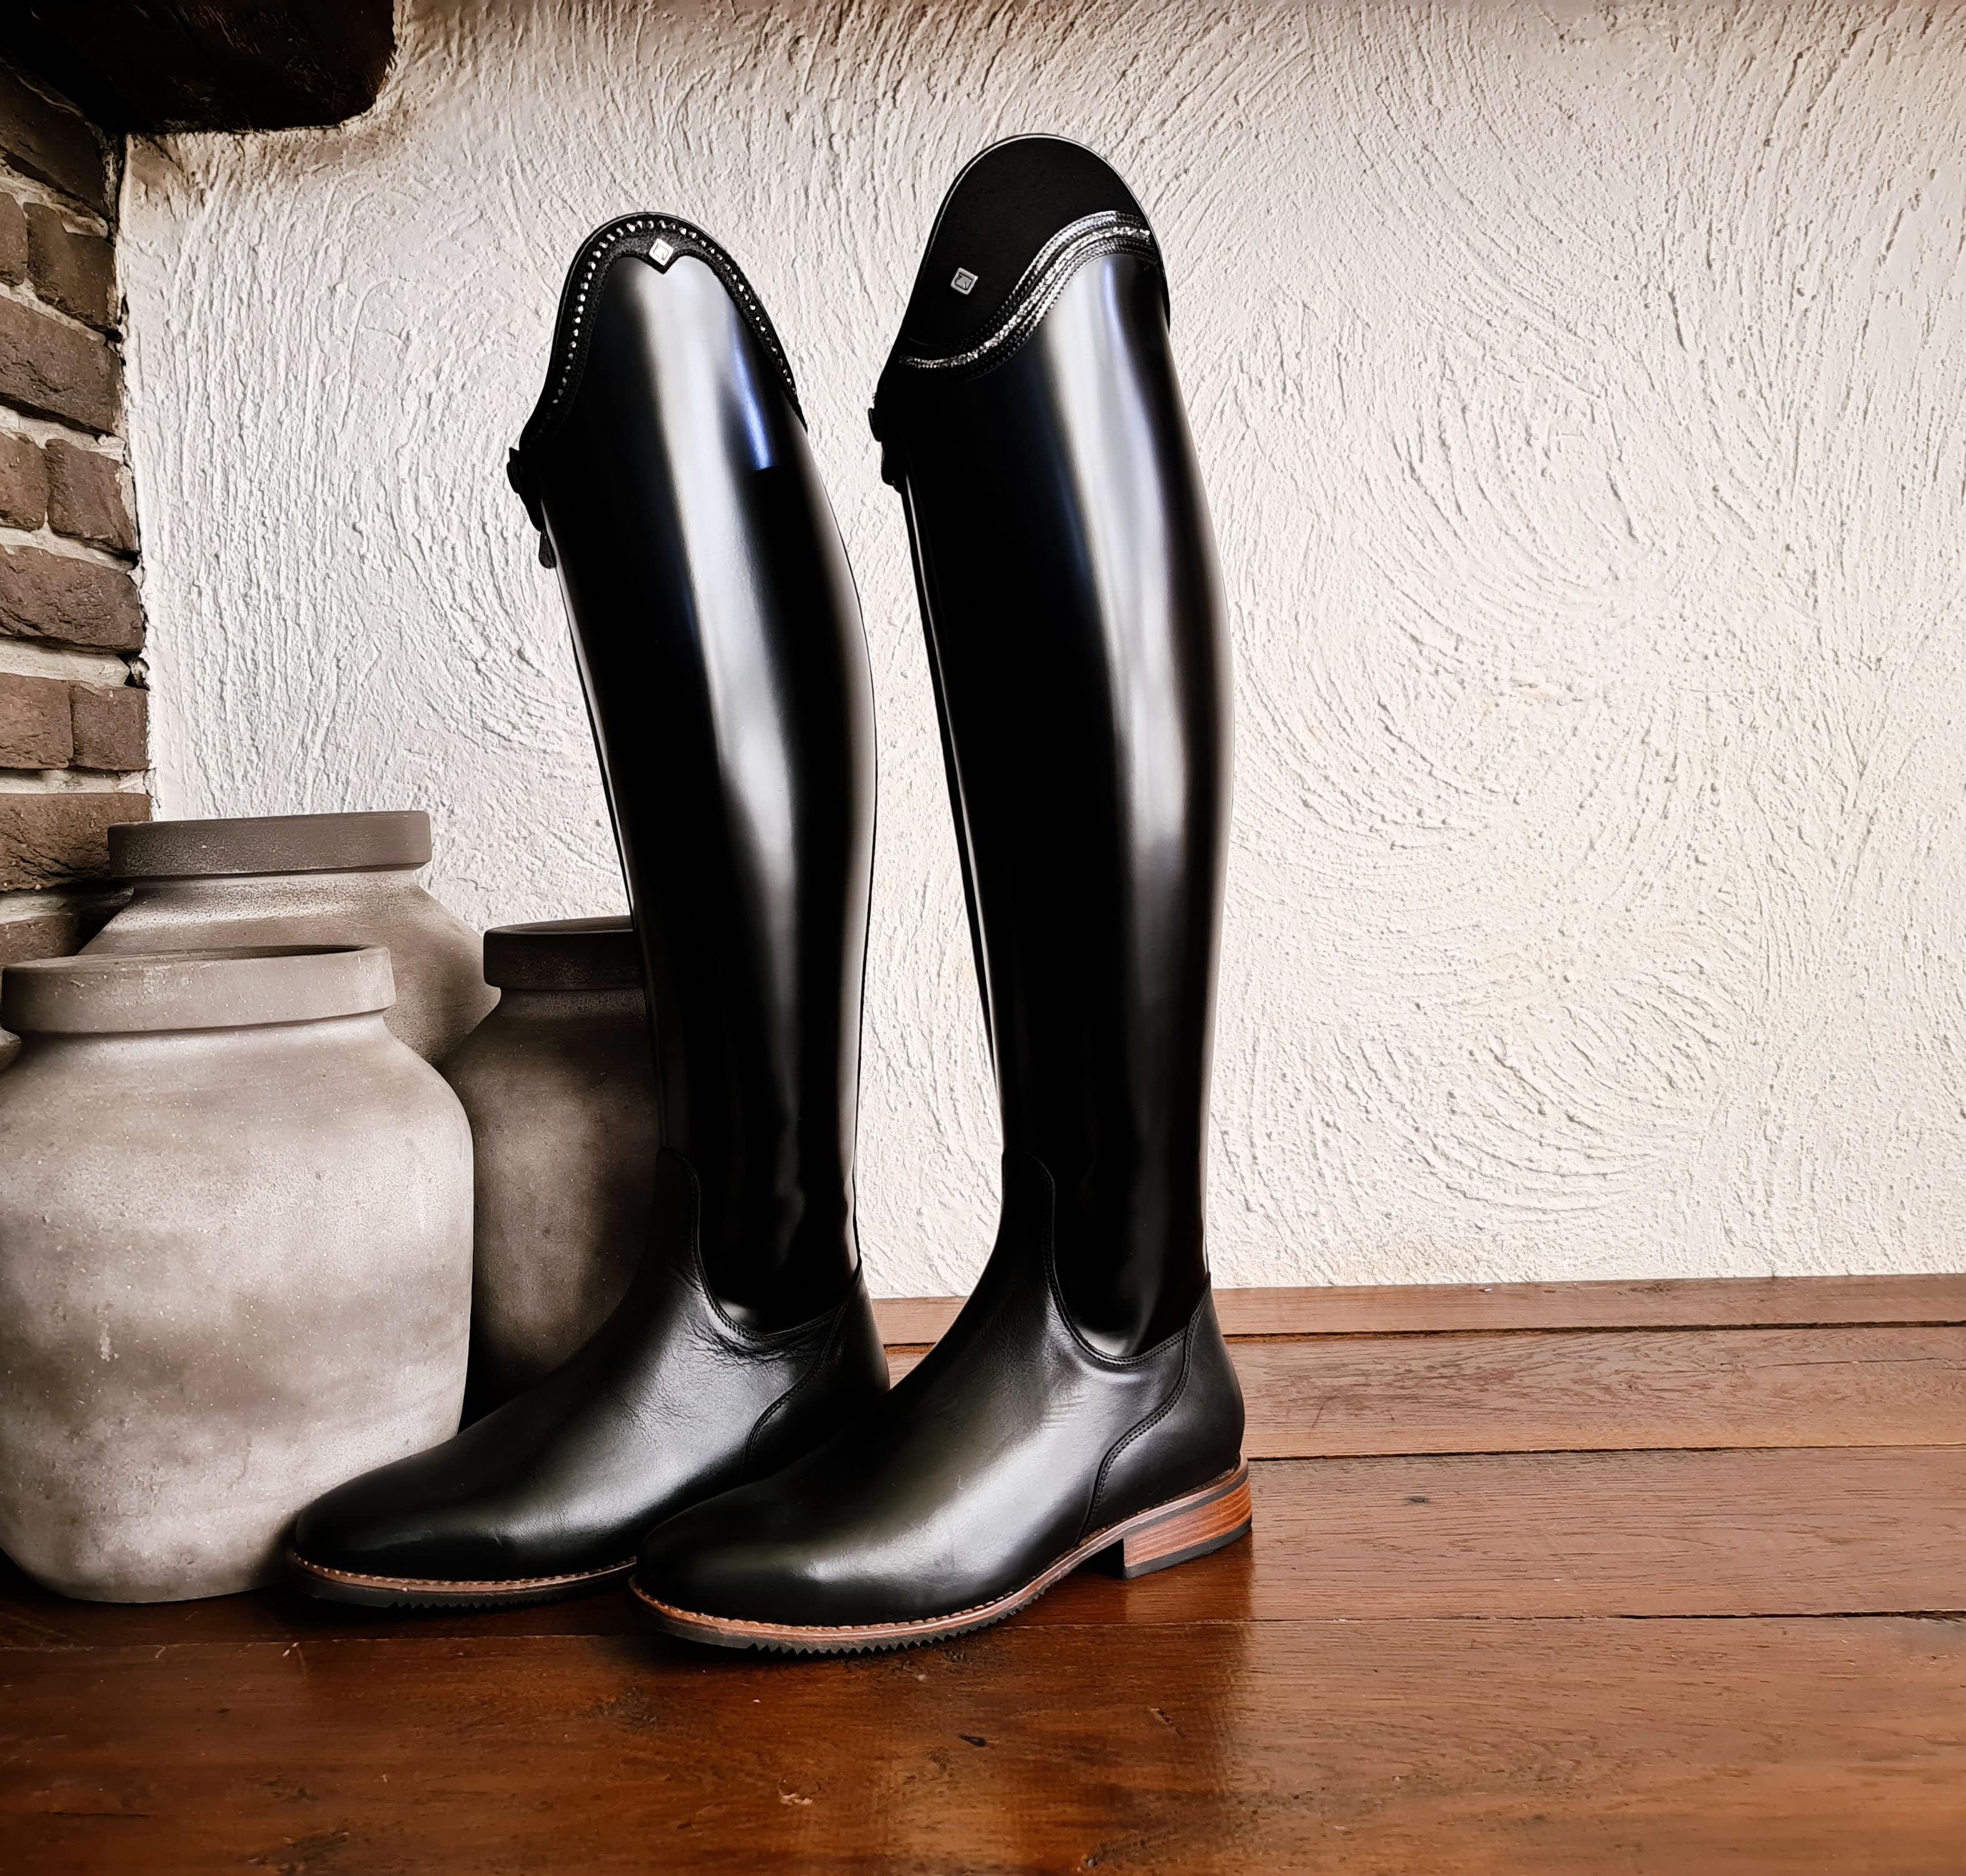 All about DeNiro's dressage models - Blogpost -My Riding Boots